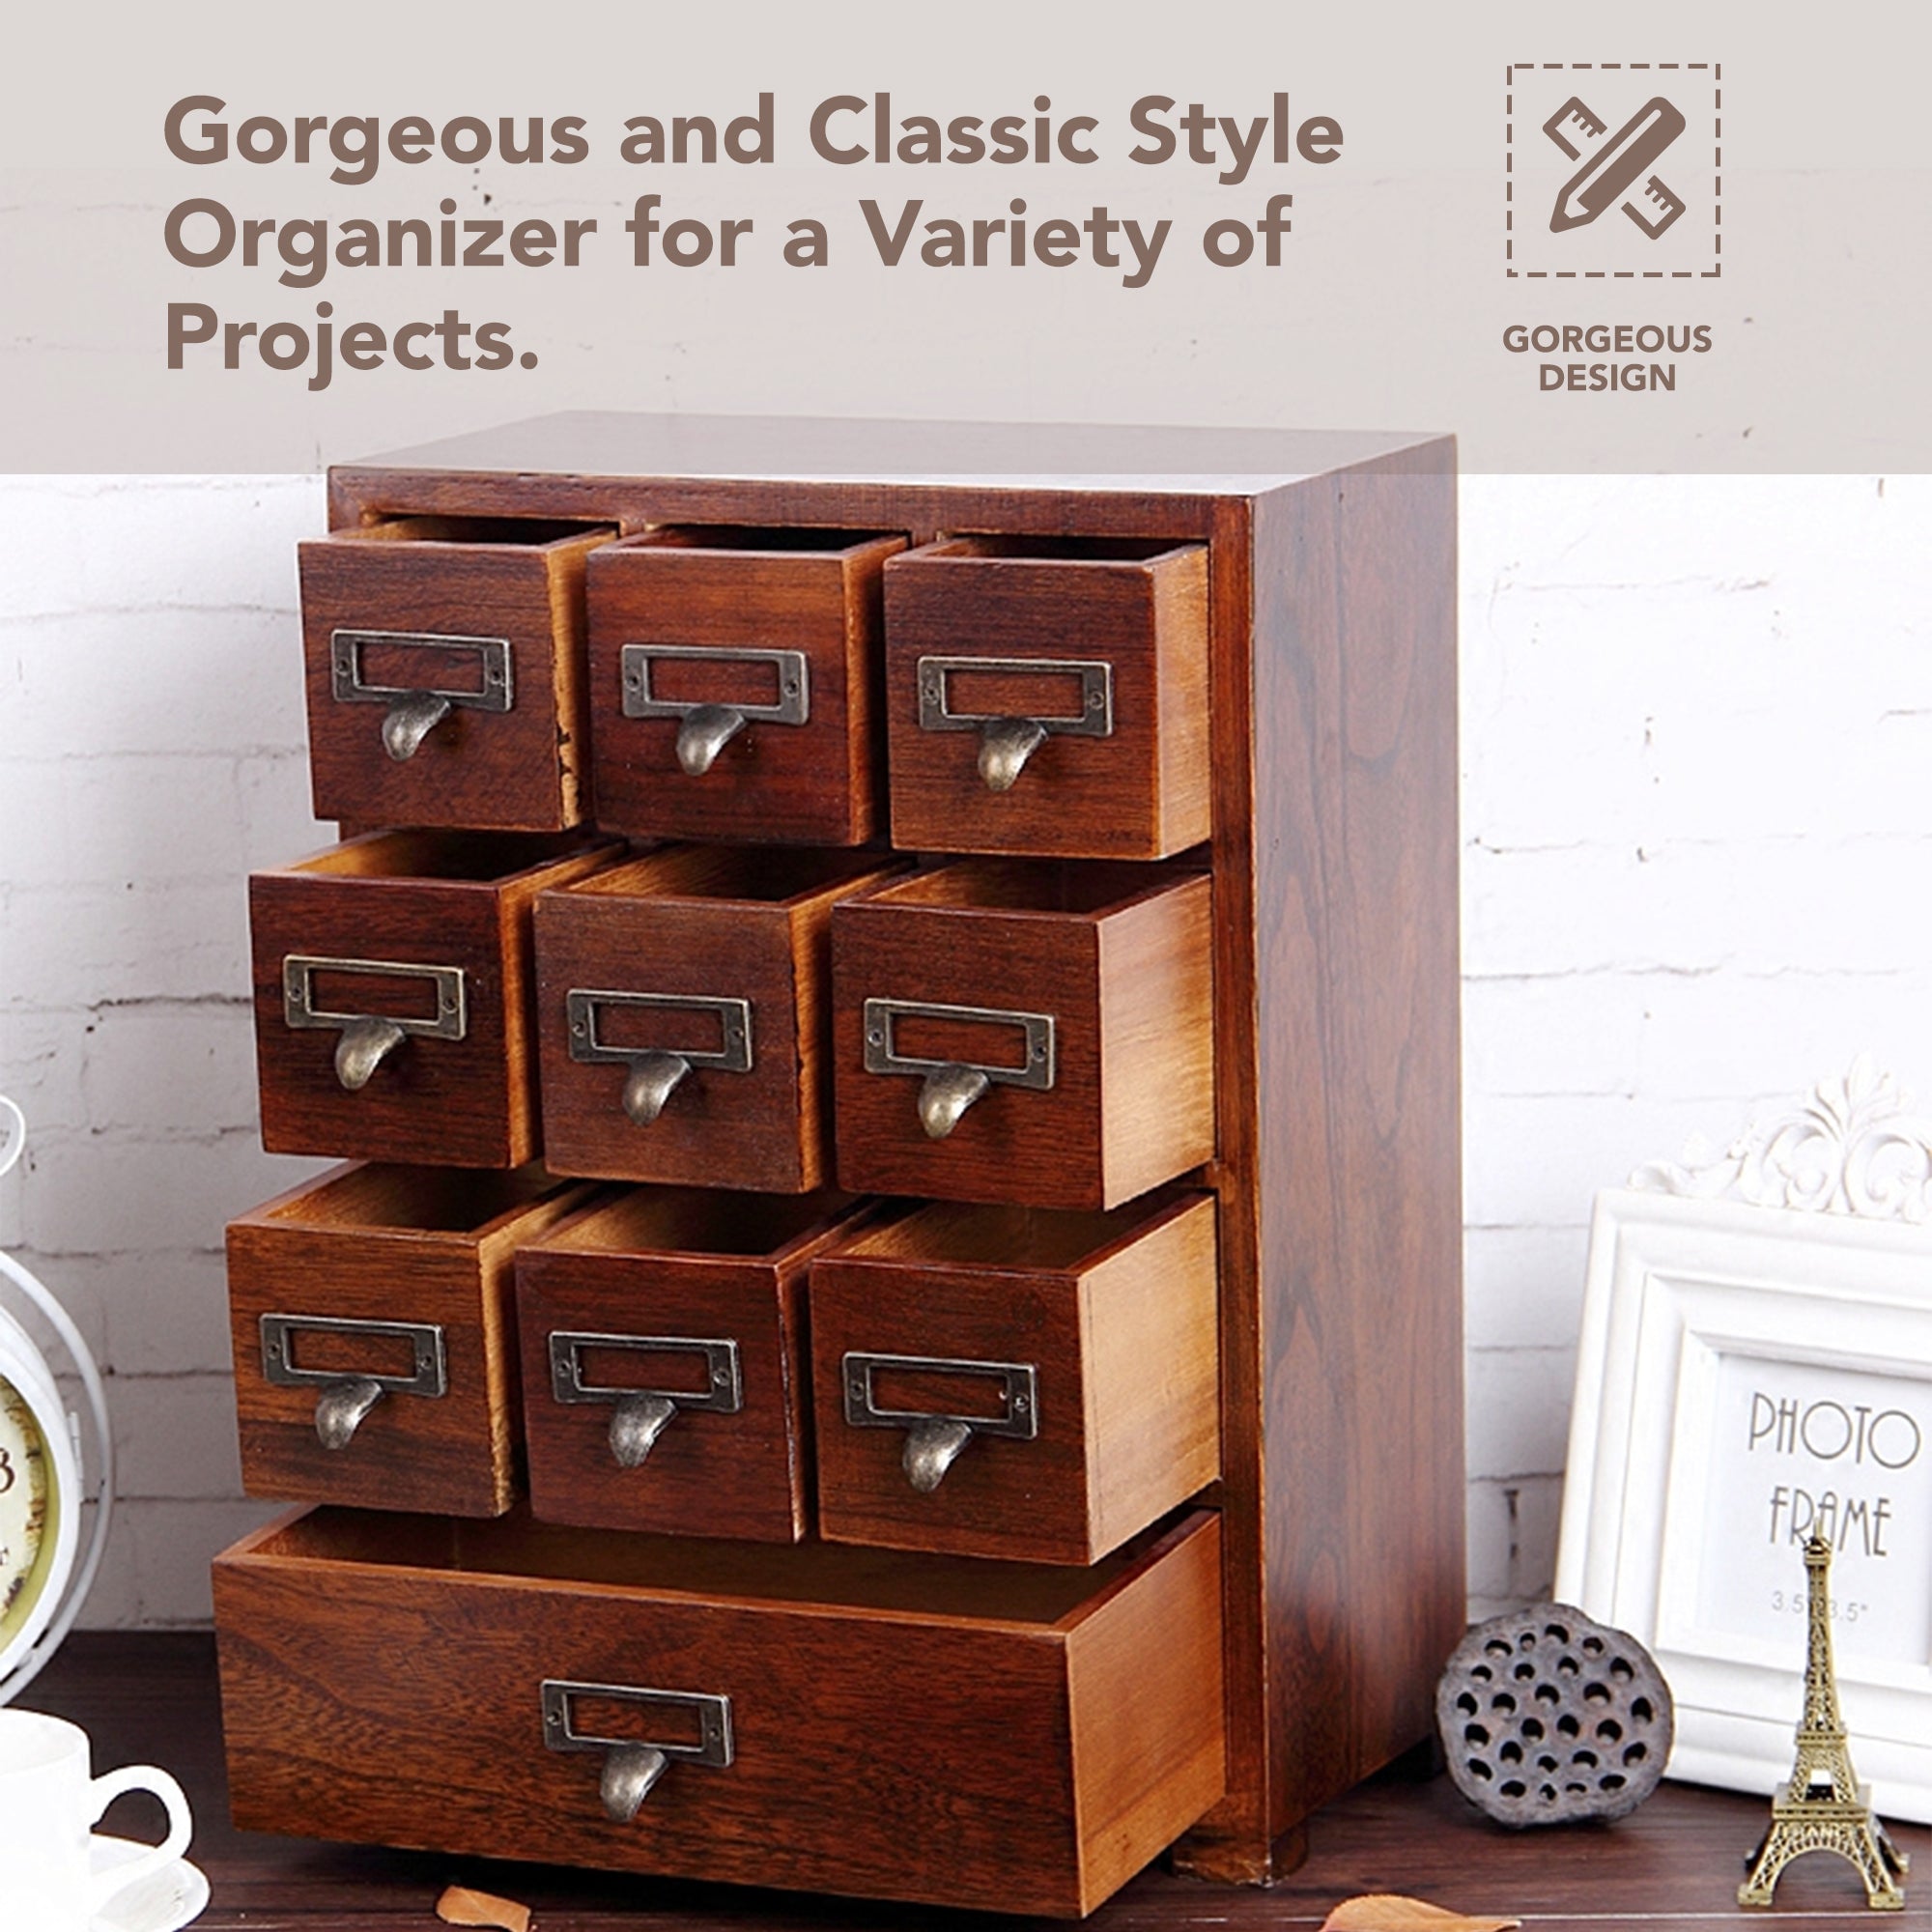 Load image into Gallery viewer, Desktop Apothecary Library Card Catalog Medicine 10 Drawer Cabinet | Clutter Free Home